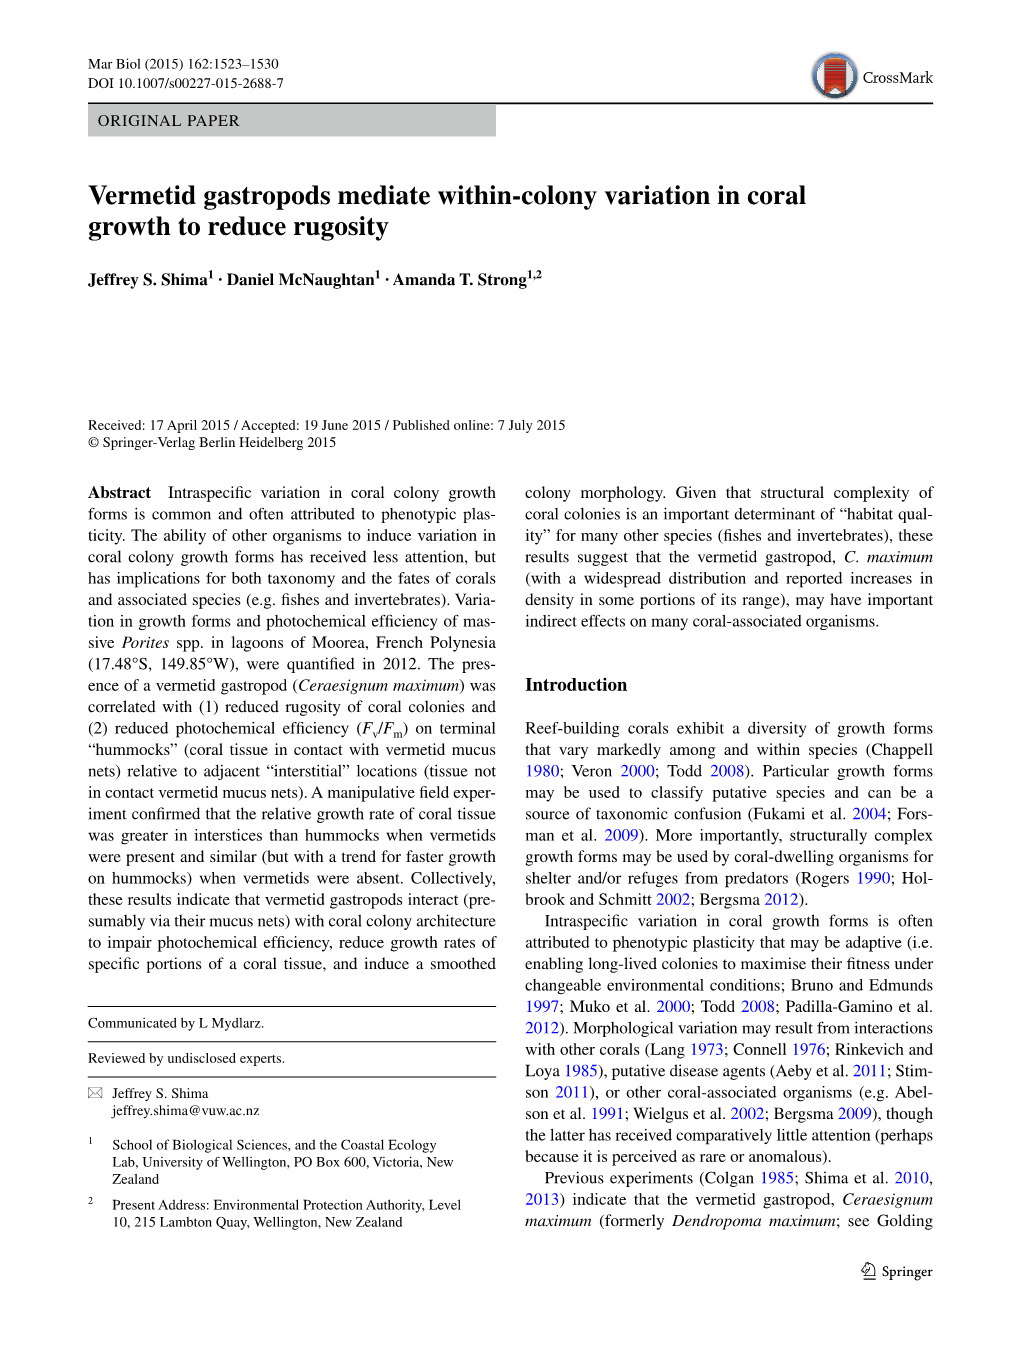 Vermetid Gastropods Mediate Within-Colony Variation in Coral